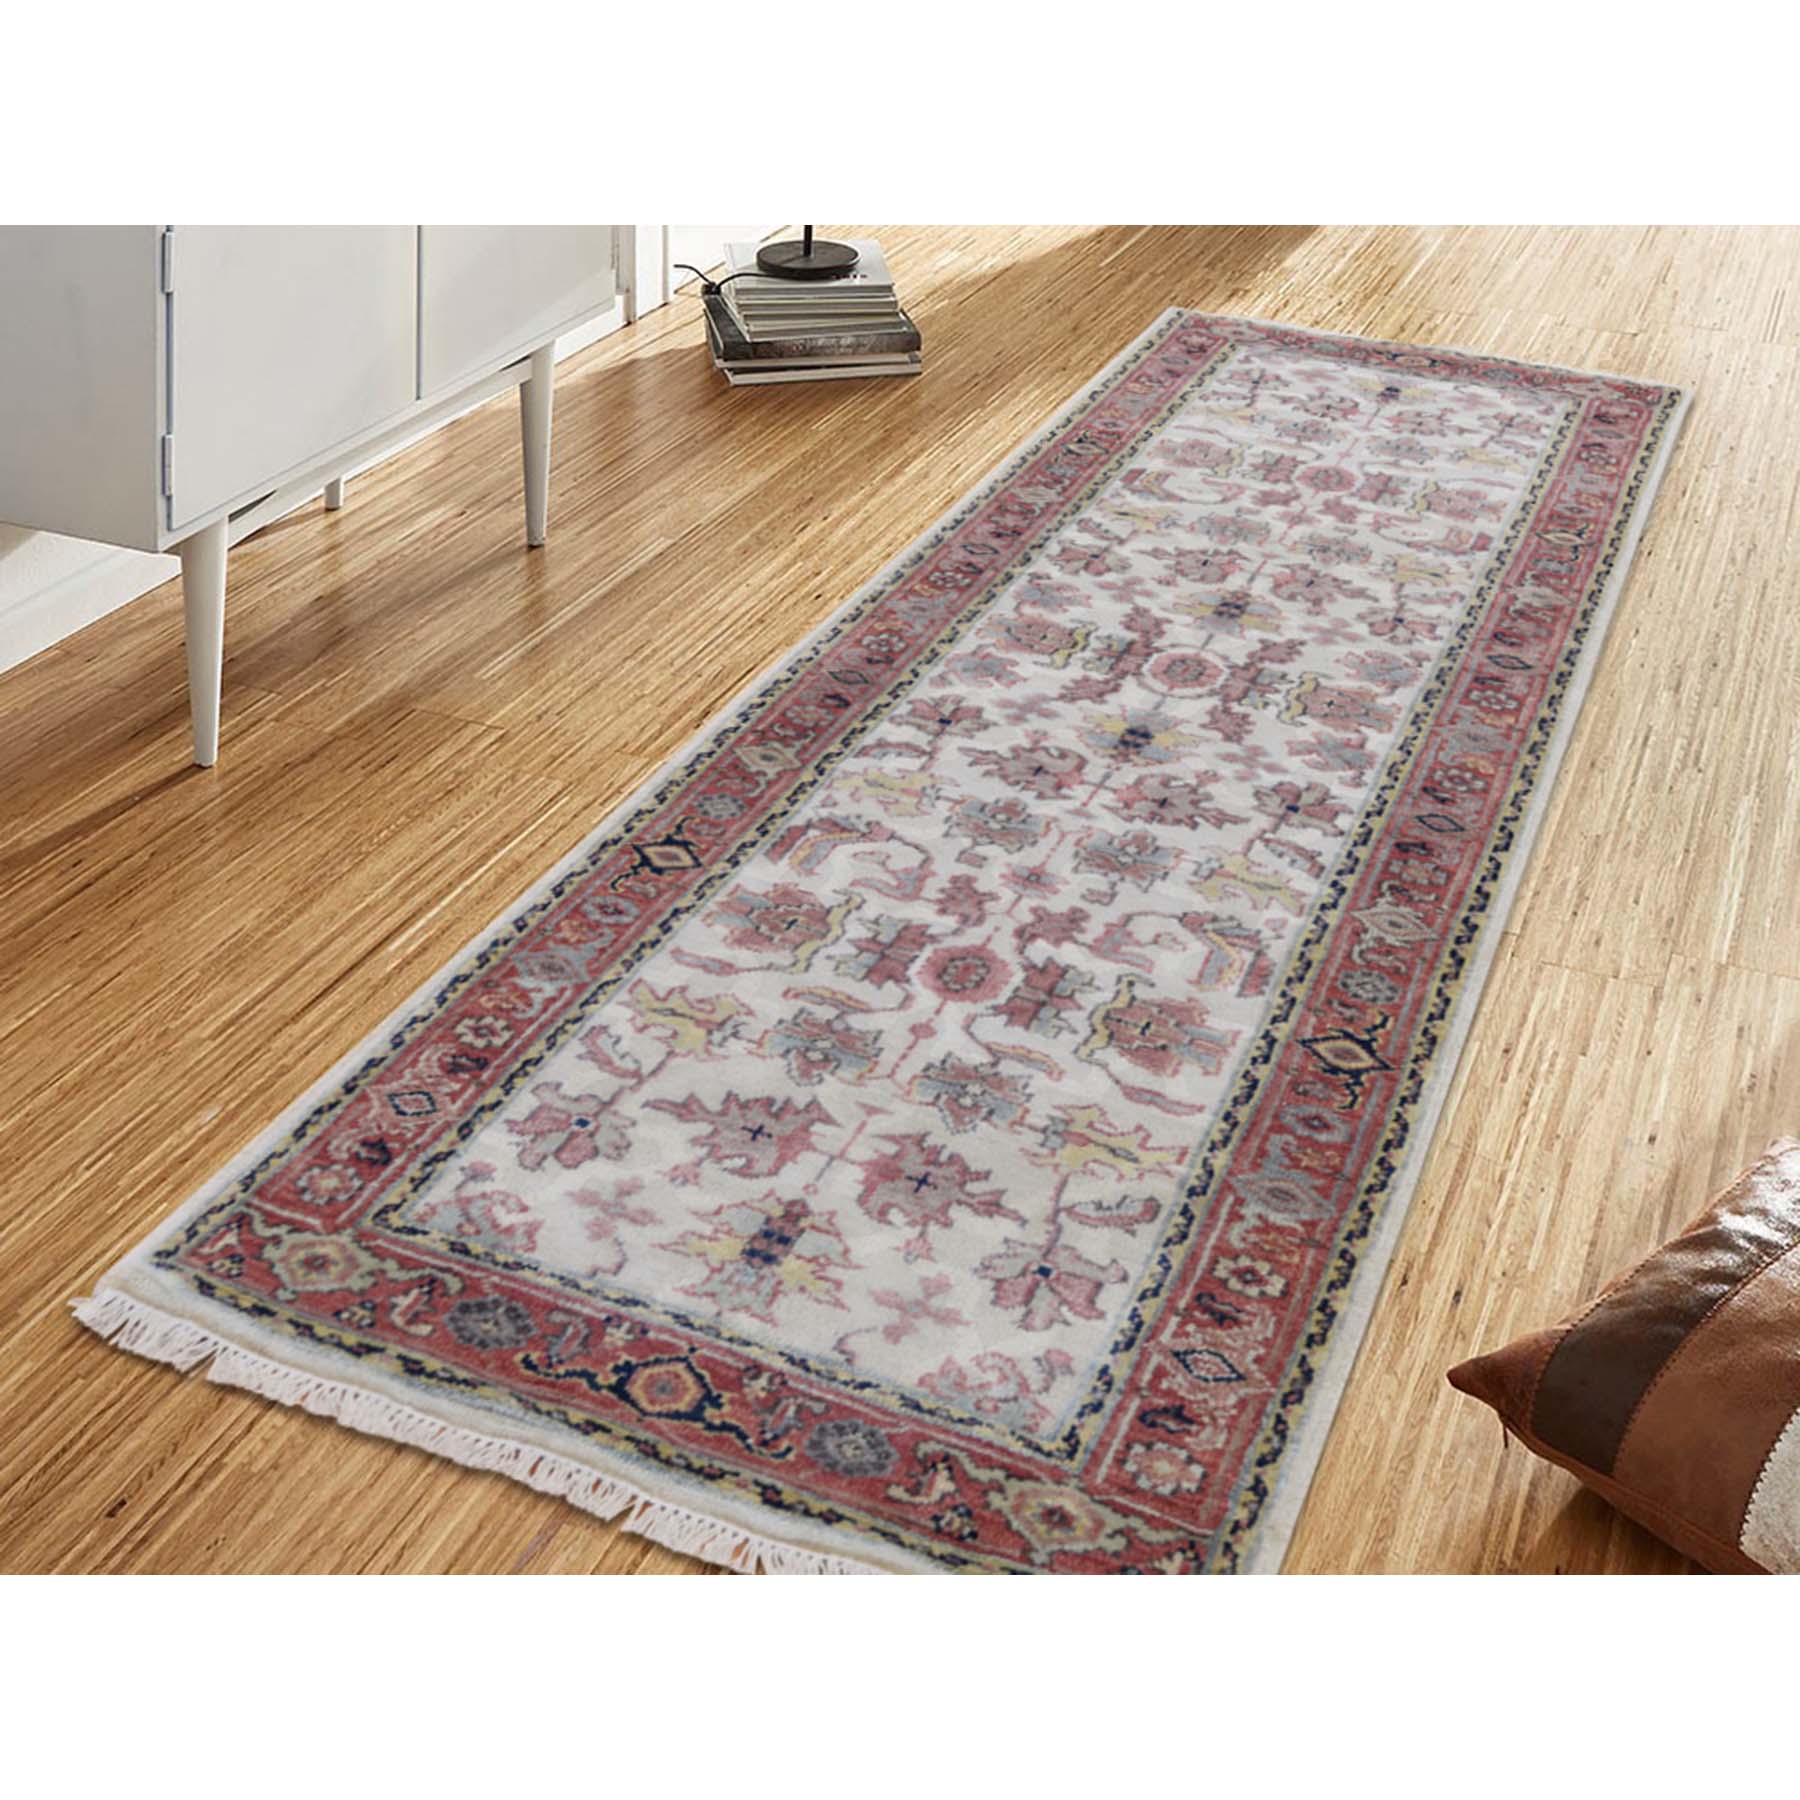 2-6 x7-9  Ivory Heriz Revival All Over Design Pure Wool Hand-Knotted Oriental Runner Rug 